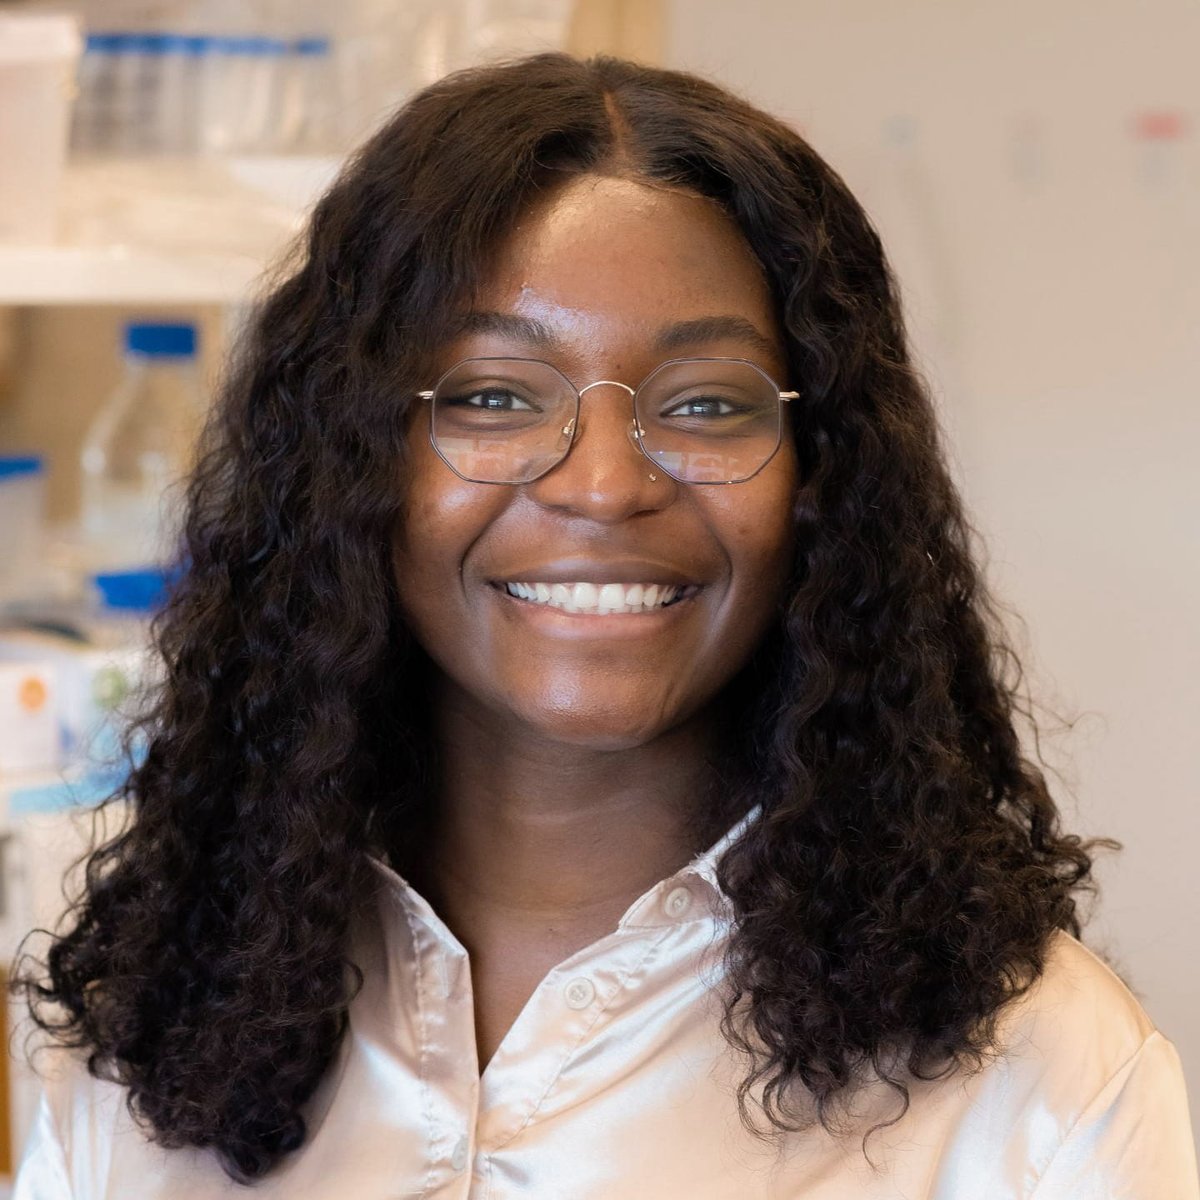 Congratulations @_shoolaa for receiving the Robert Mozia Graduate Distinguished Service award to recognize her outstanding contributions to the Cornell community and beyond. So well-deserved!!! @CornellBME #DPEawards @CornellEng @FischbachLab